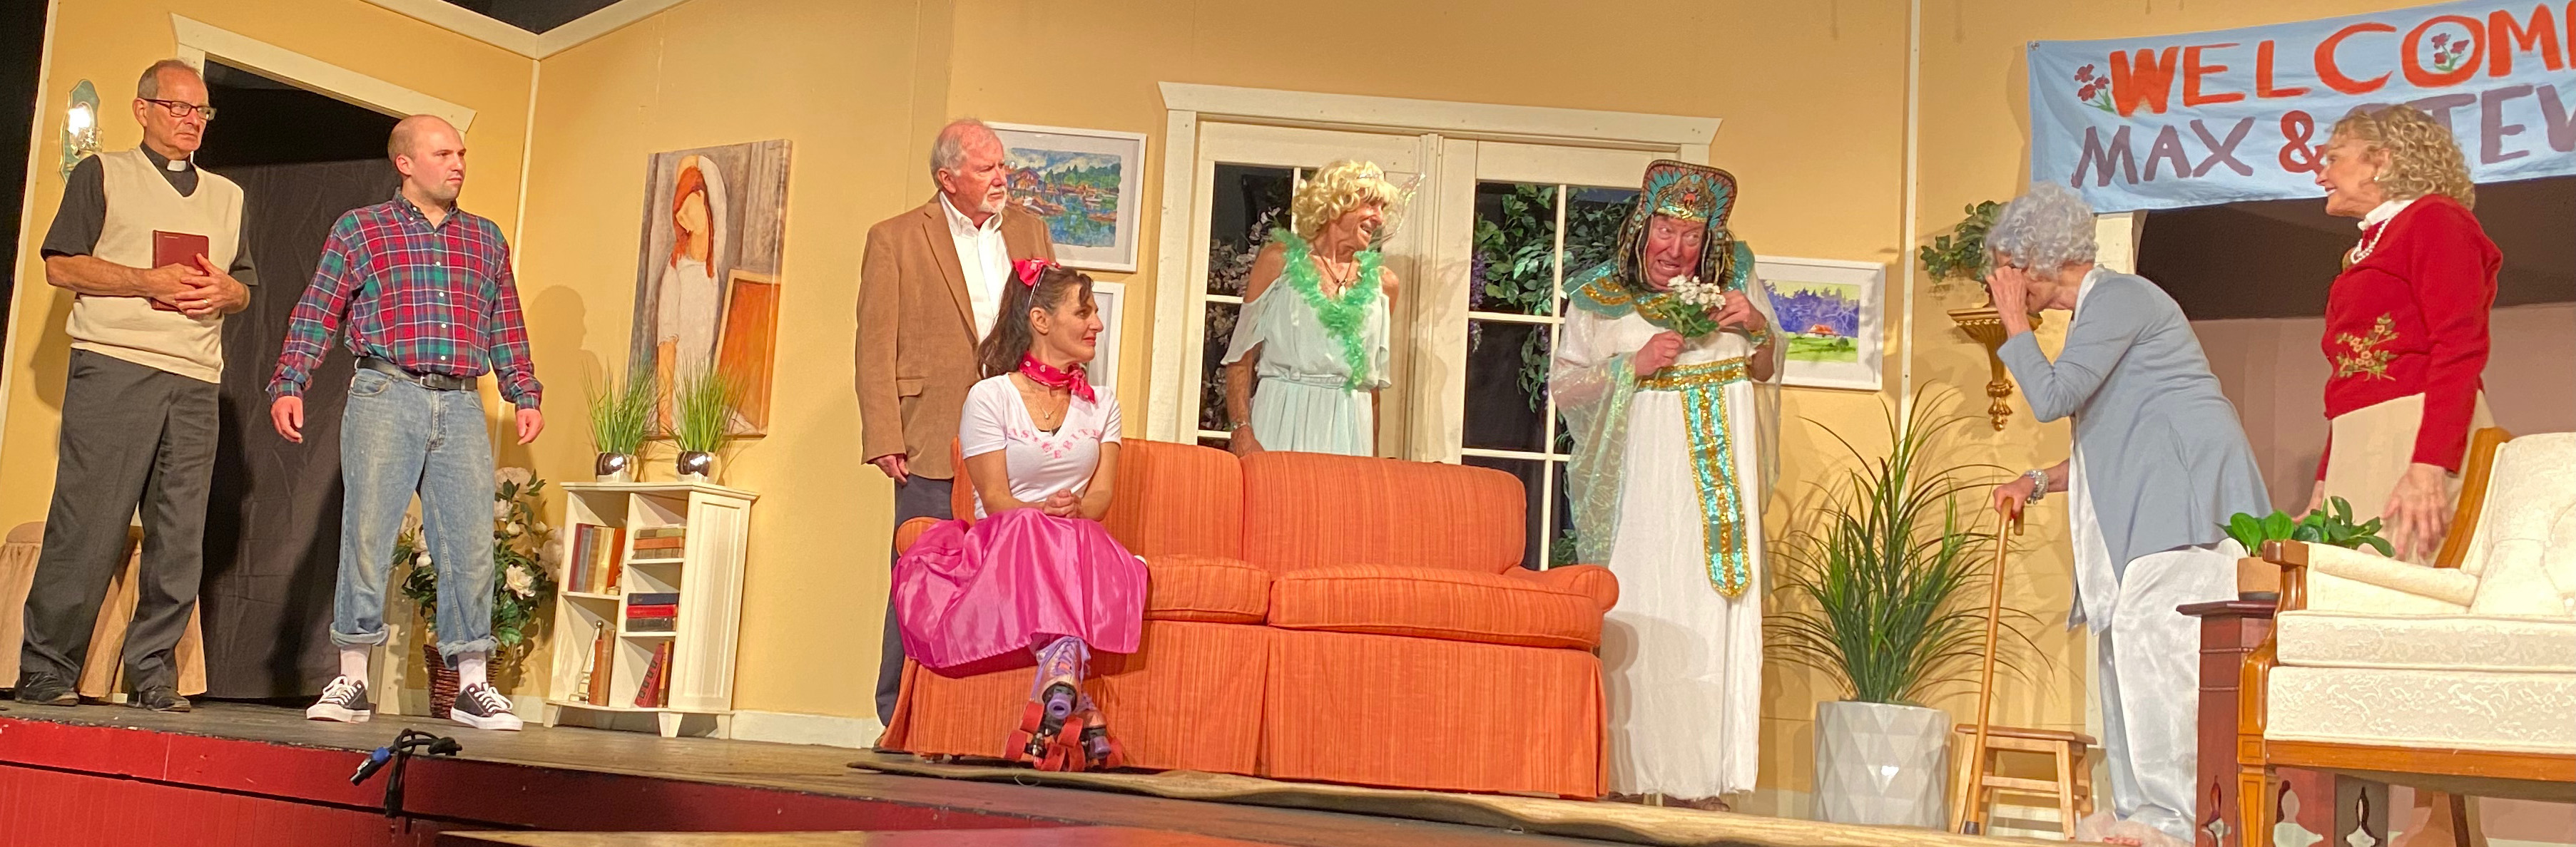 The members of the North Georgia Community Players will perform “Leading Ladies” Friday, Saturday and Sunday. Cast members are Steven Webster (Rev. Wooley), James Cash (Butch), Ron Leslie (Doc), seated Julie Best (Audrey), Ricky Siegel (Jack/Stephanie), David Spivey (Leo/Maxine), Susan Kent (Florence Snider), and Julie Harris (Margaret “Meg” Snider). Tickets are $12-$20 and shows will be at the Dillard Playhouse.